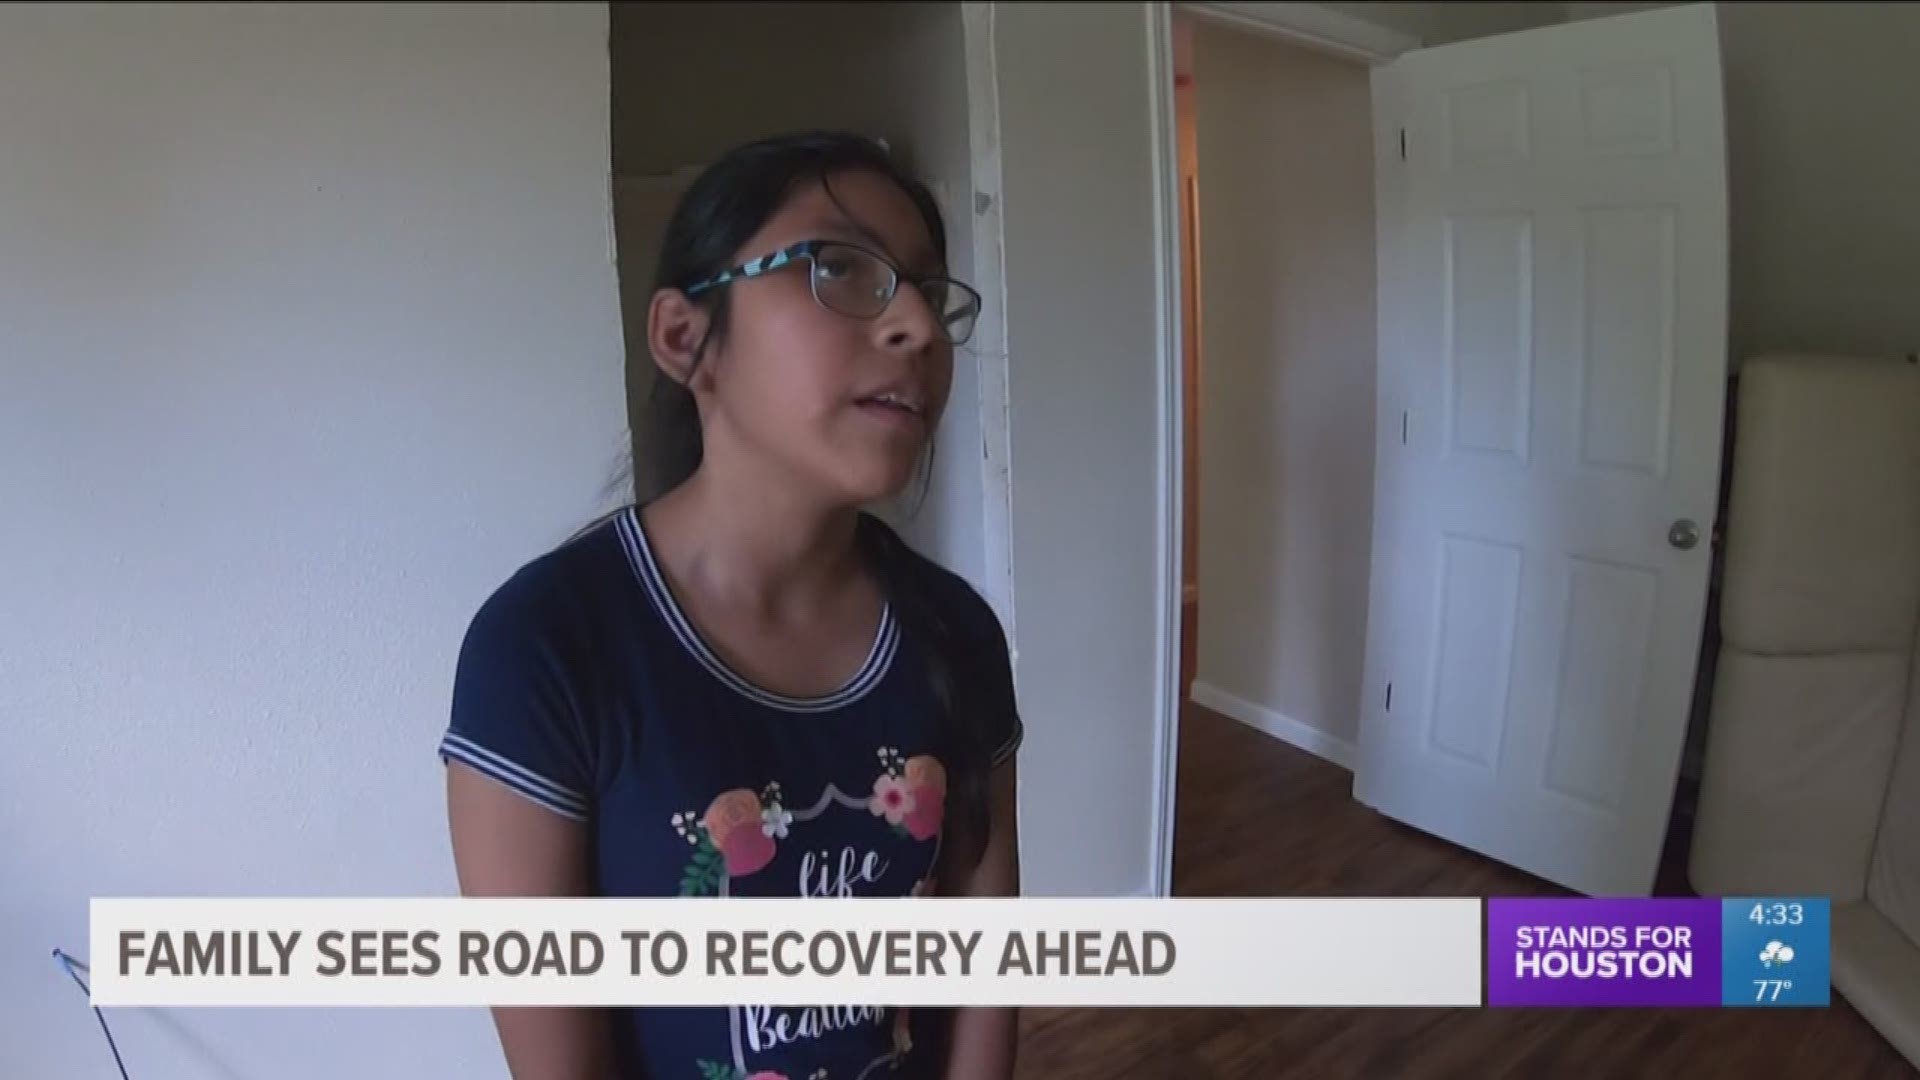 Life after Harvey continues to be a work in progress for scores of Houston-area families. But one League City family sees its road to recovery finally reaching an end with the help of perfect strangers.